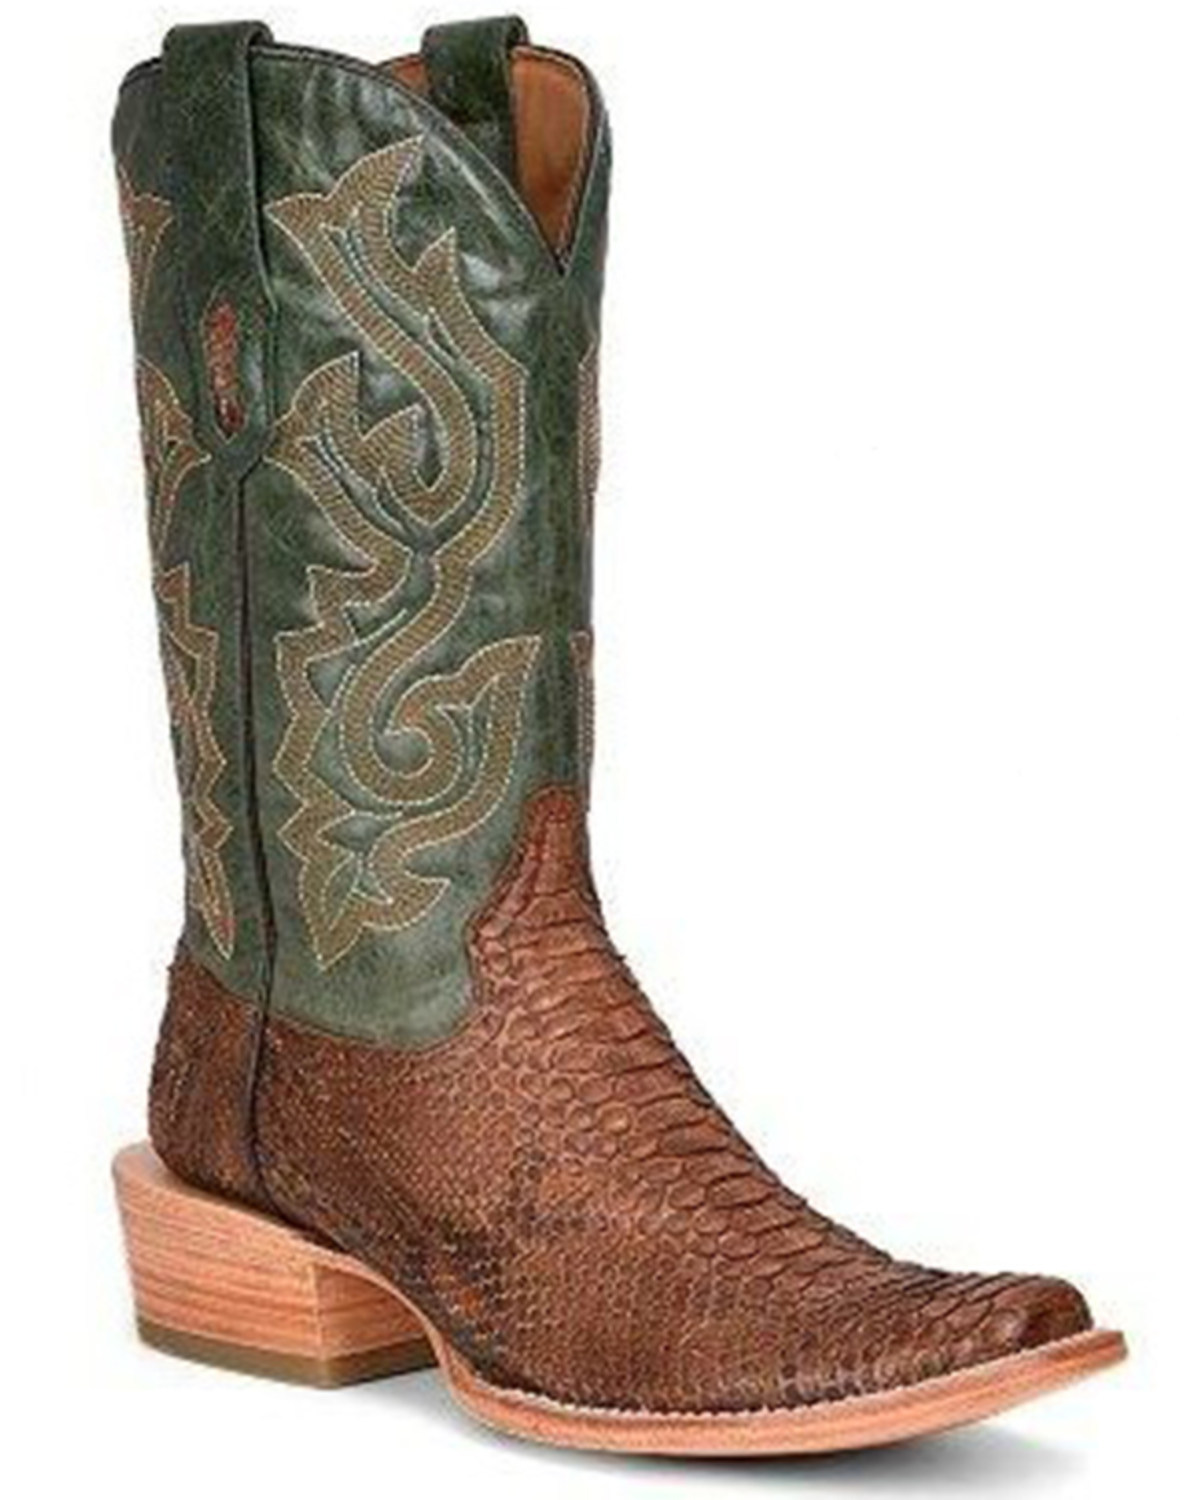 Corral Men's Exotic Python Embroidered Performance Western Boots - Square Toe